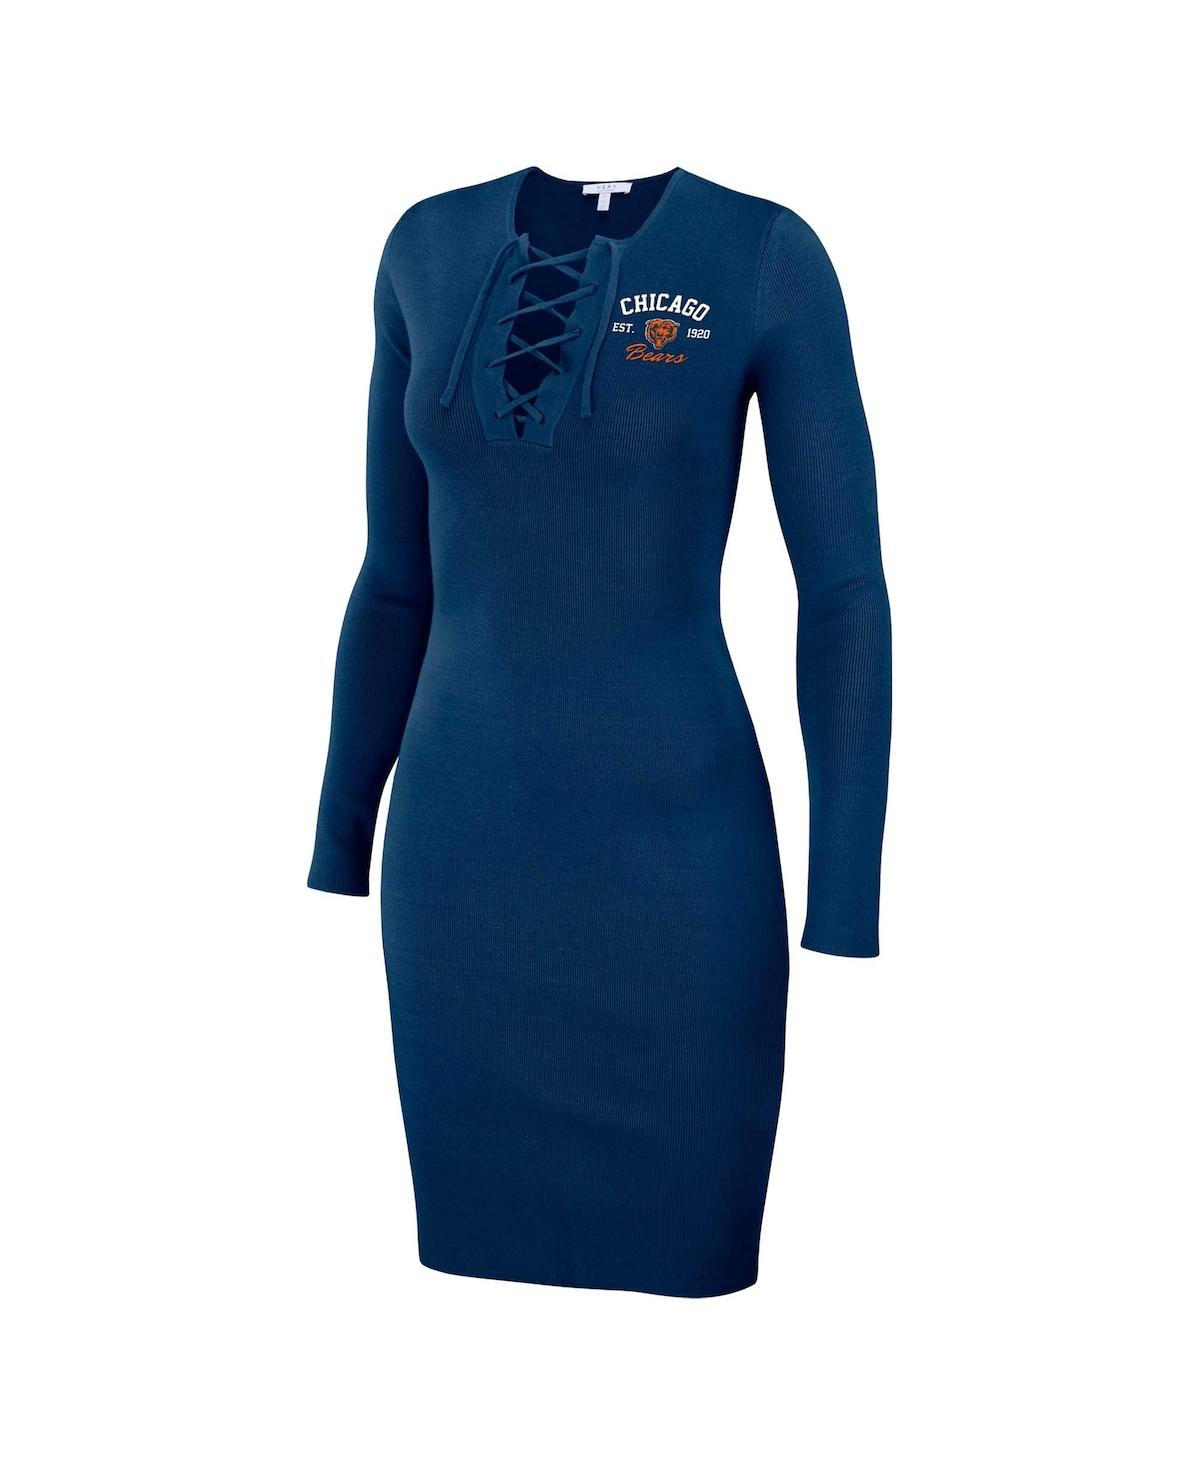 Shop Wear By Erin Andrews Women's  Navy Chicago Bears Lace Up Long Sleeve Dress